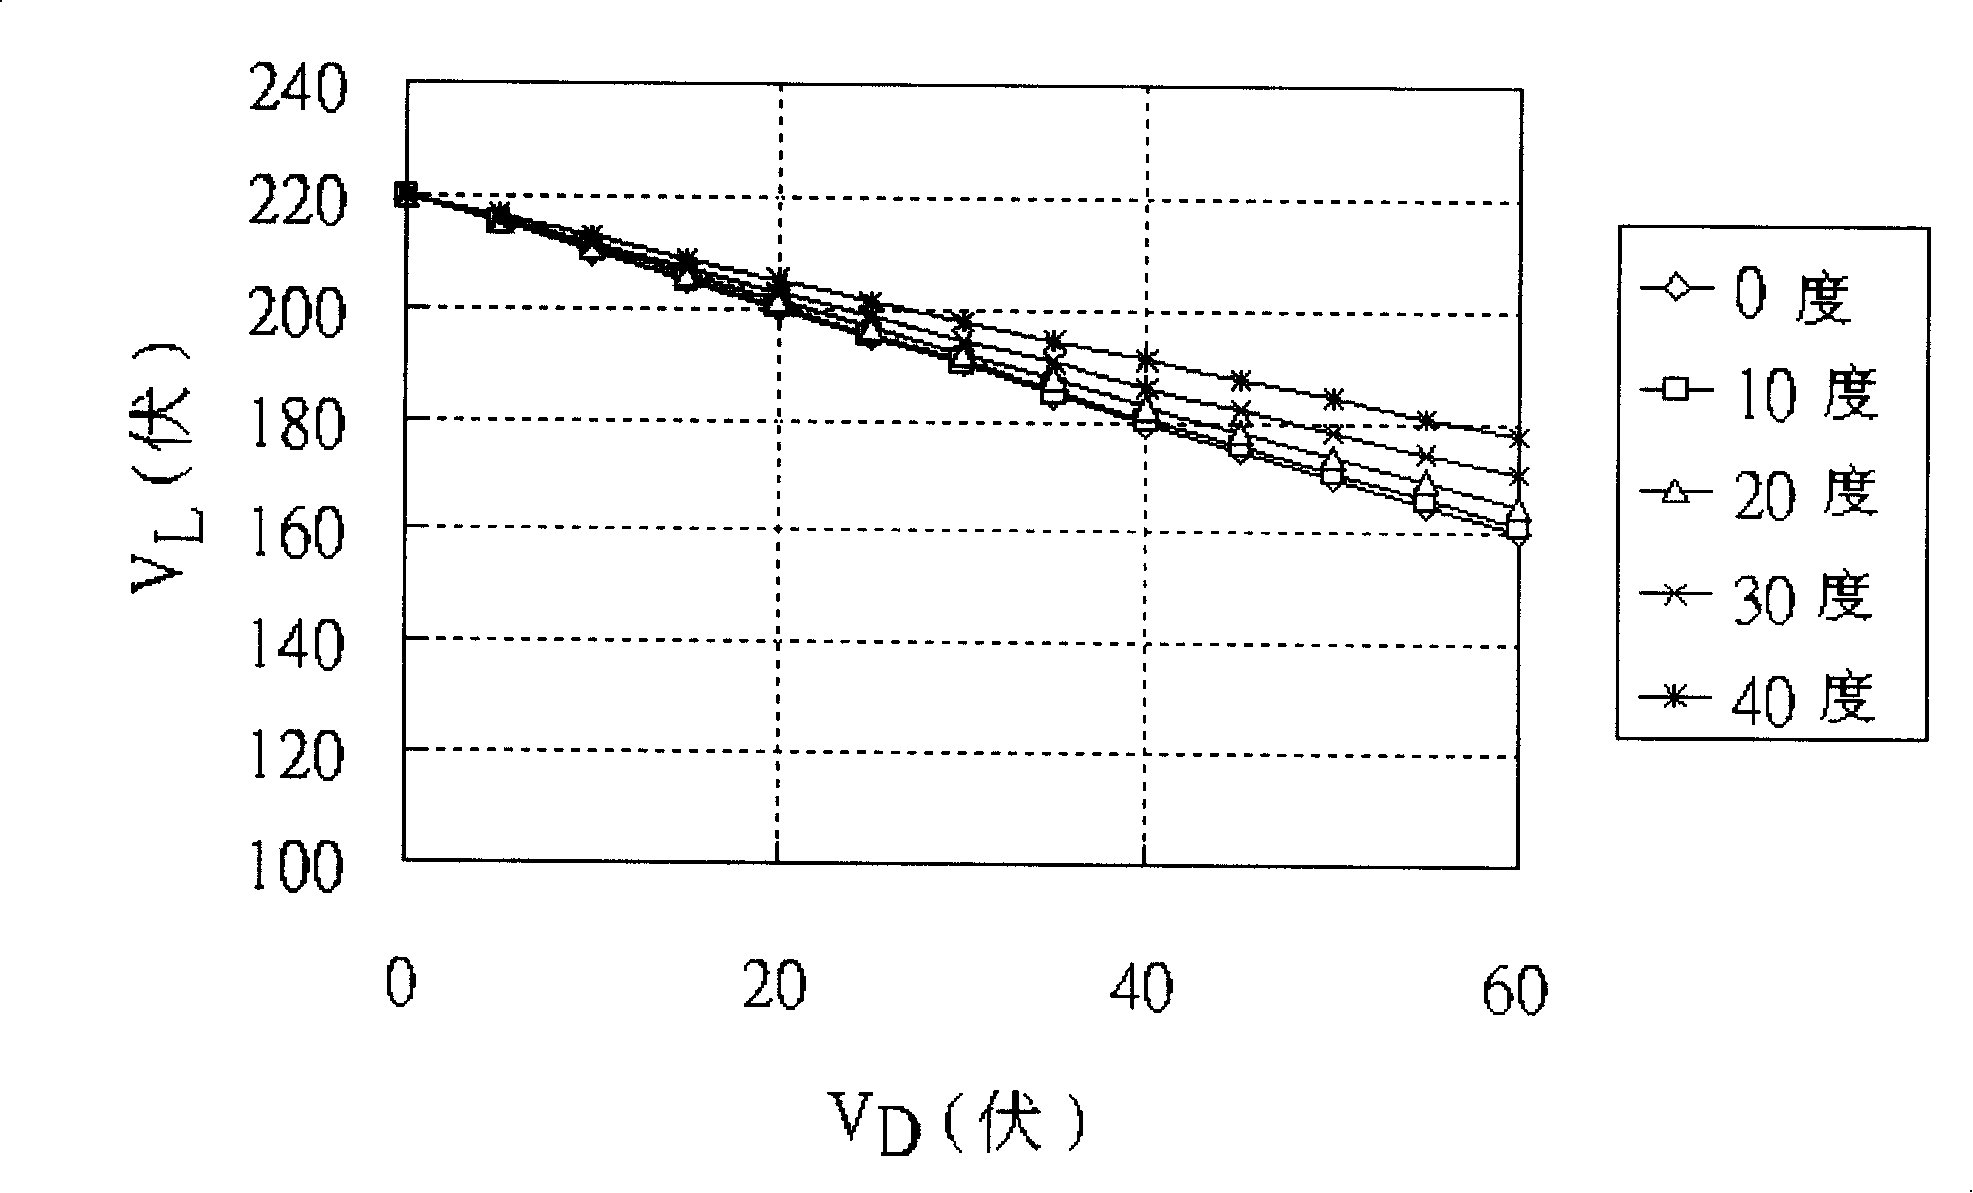 Electric voltage regulating and controlling circuit of illumination light